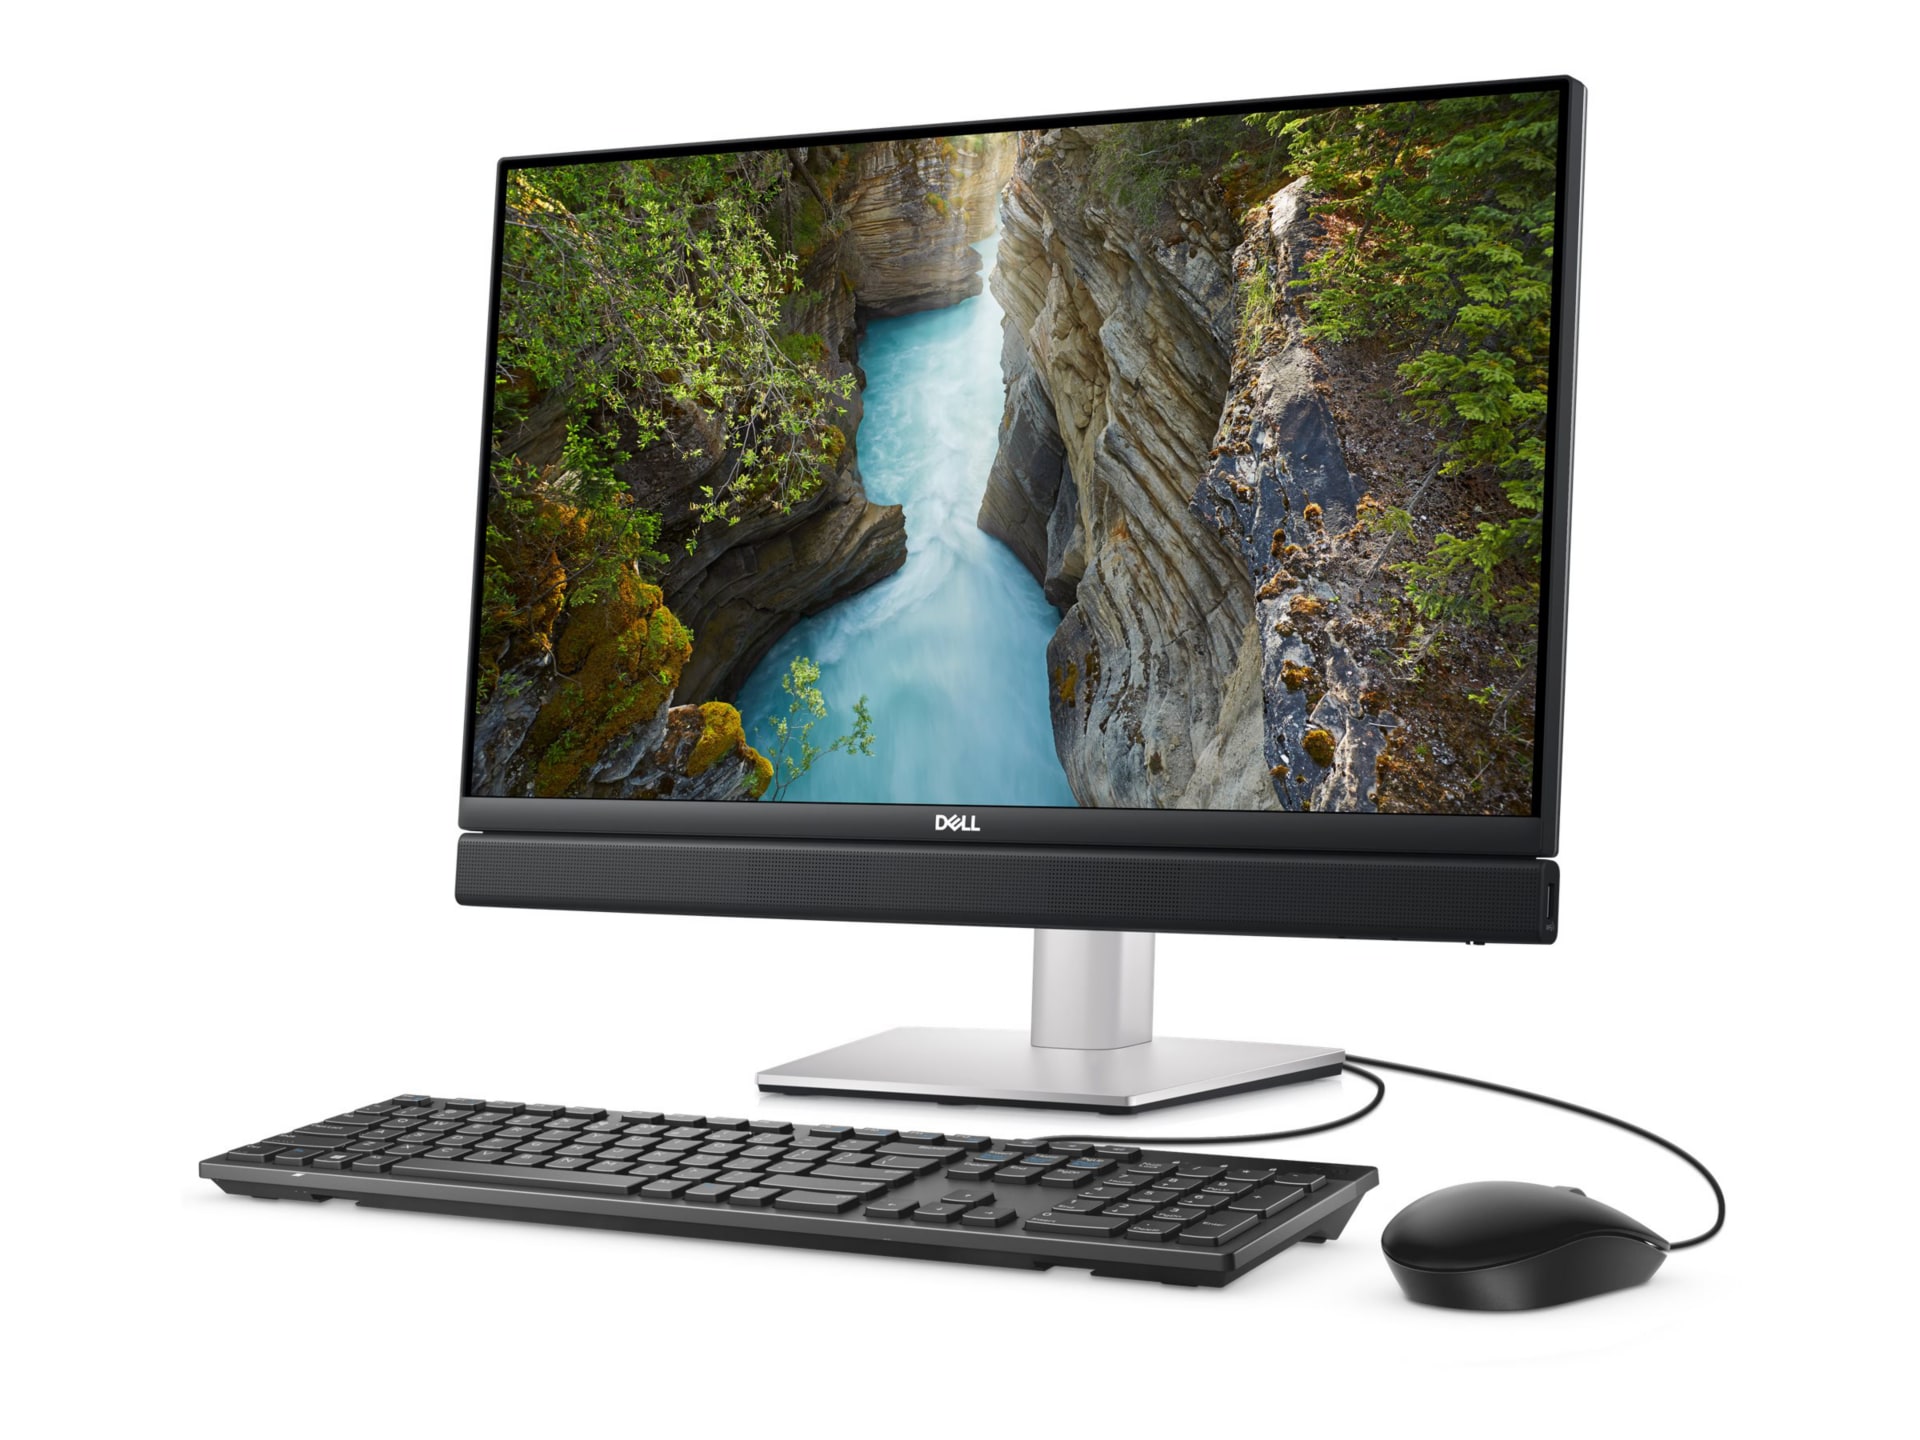 Dell OptiPlex 7410 Plus All In One - all-in-one - Core i5 13500 2.5 GHz - vPro Enterprise - 8 GB - SSD 256 GB - LED